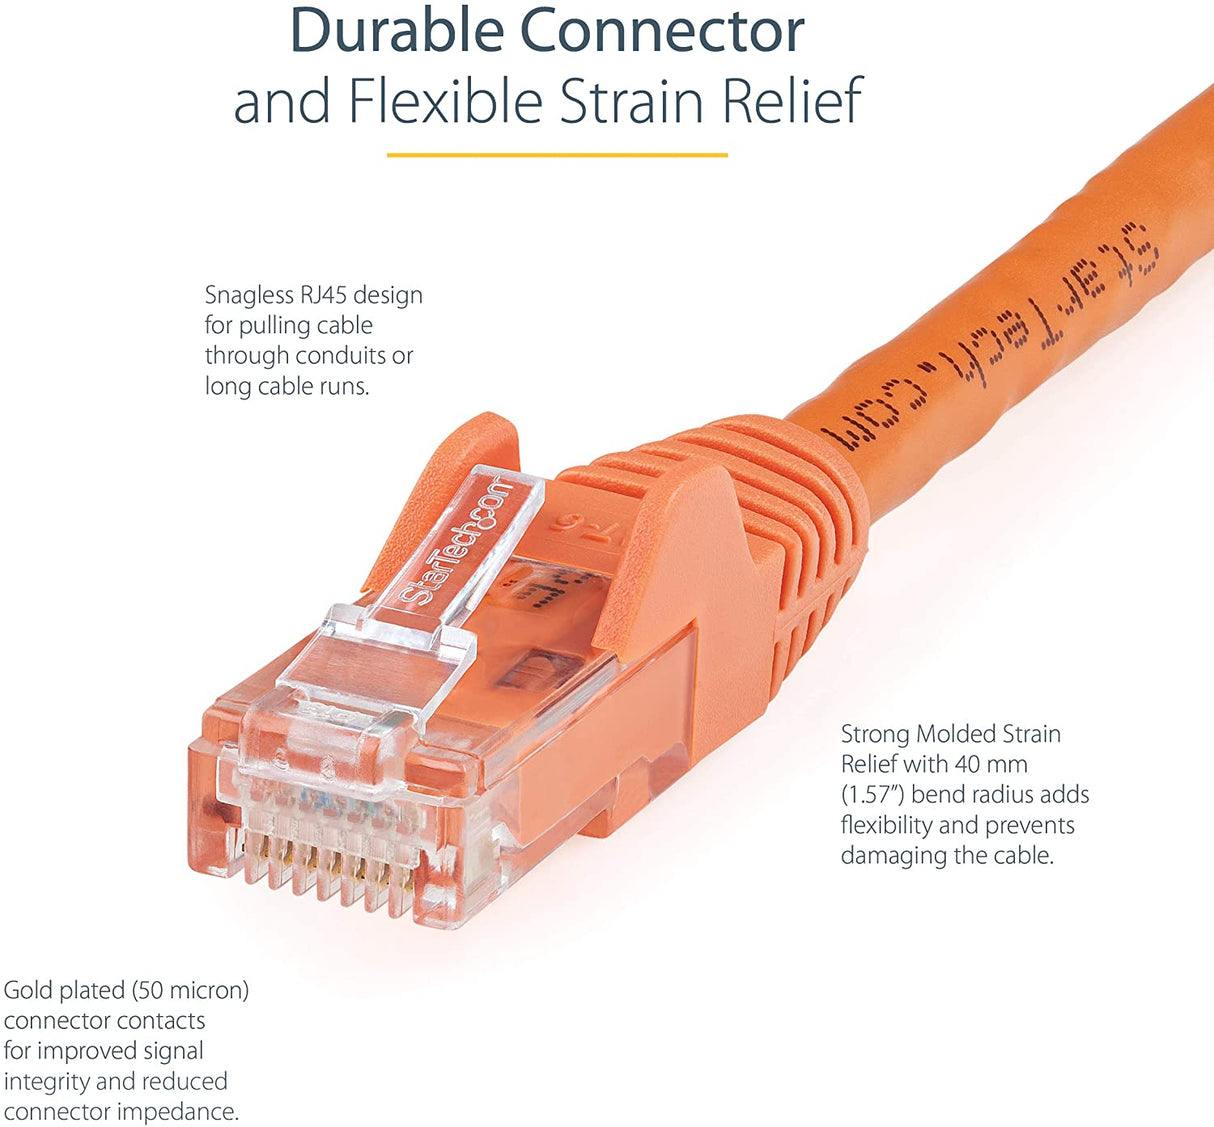 StarTech.com 8ft CAT6 Ethernet Cable - Orange CAT 6 Gigabit Ethernet Wire -650MHz 100W PoE++ RJ45 UTP Category 6 Network/Patch Cord Snagless w/Strain Relief Fluke Tested (N6PATCH8OR), 8 ft / 2.5m Orange 8 ft / 2.4 m 1 Pack